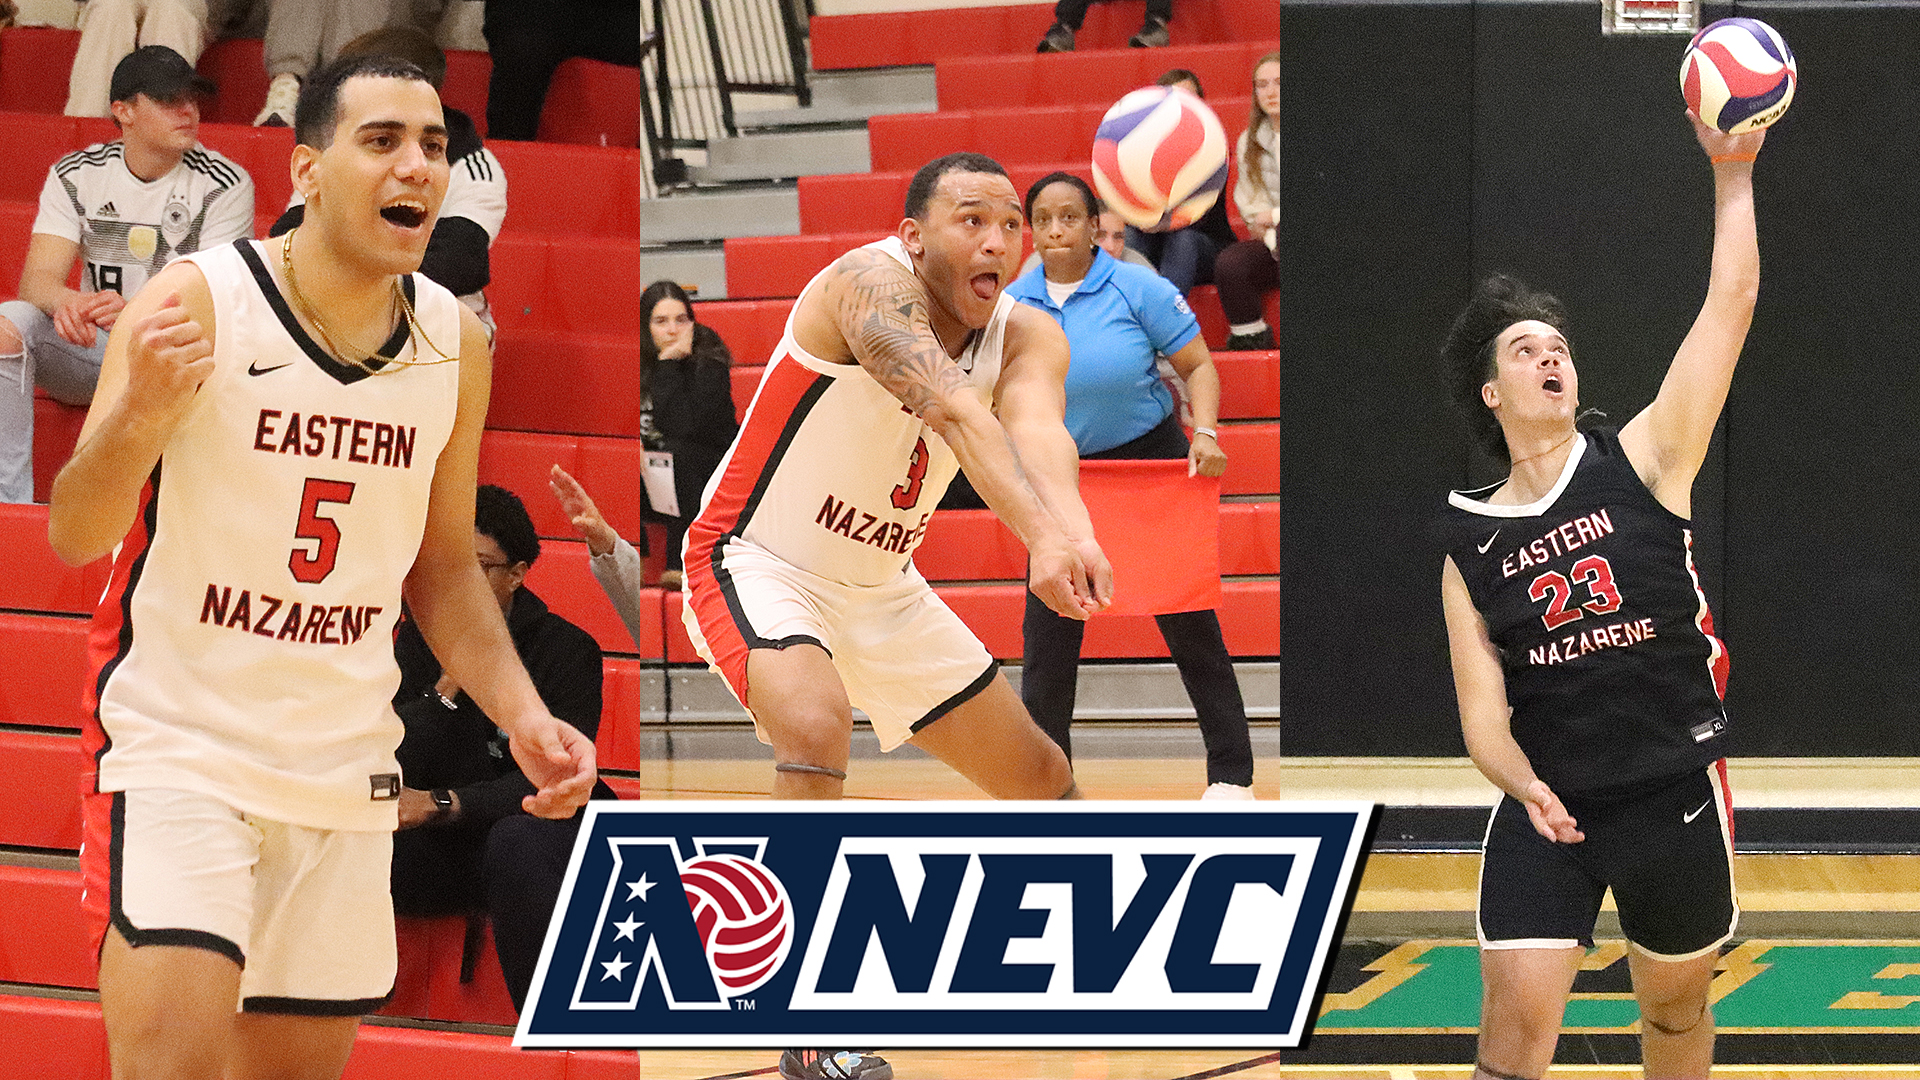 Men’s Volleyball Garners Three All-NEVC Selections